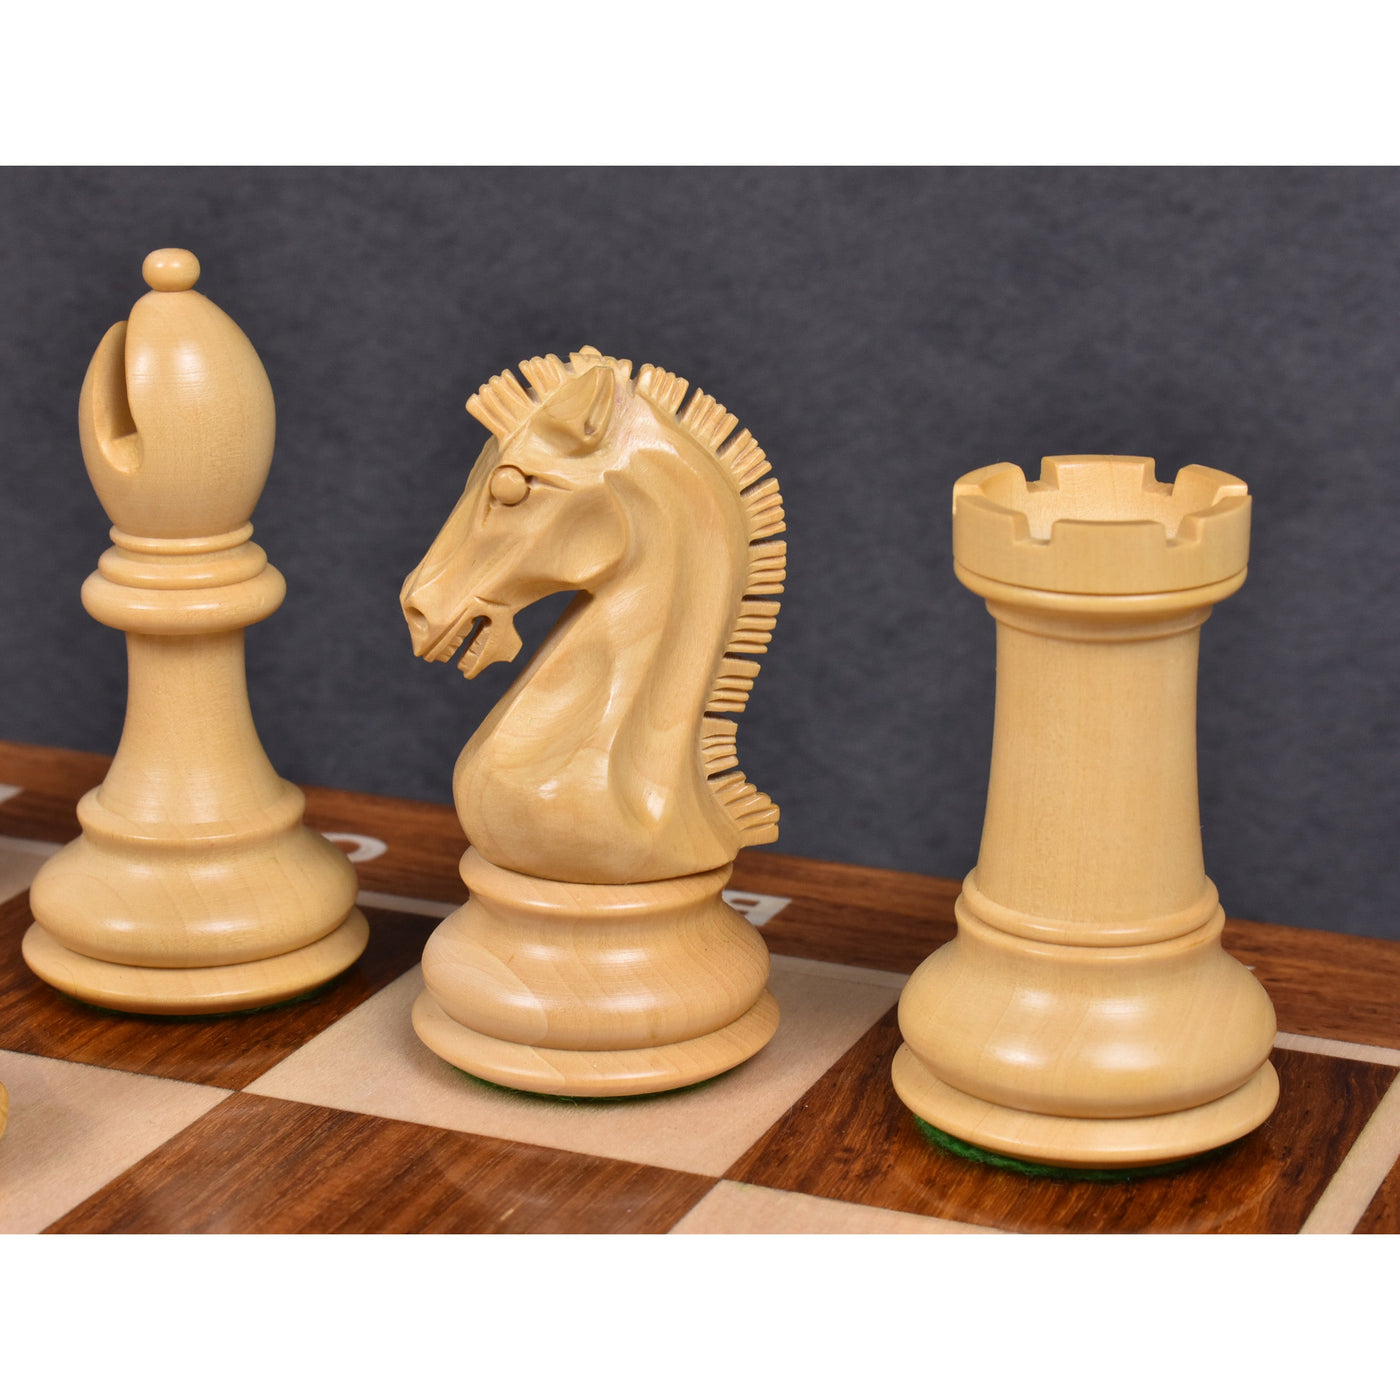 3.9" Craftsman Series Staunton Golden Rosewood Chess Pieces With 21" Drueke Style Golden Rosewood & Maple Wood Chess board and Leatherette Coffer Storage Box